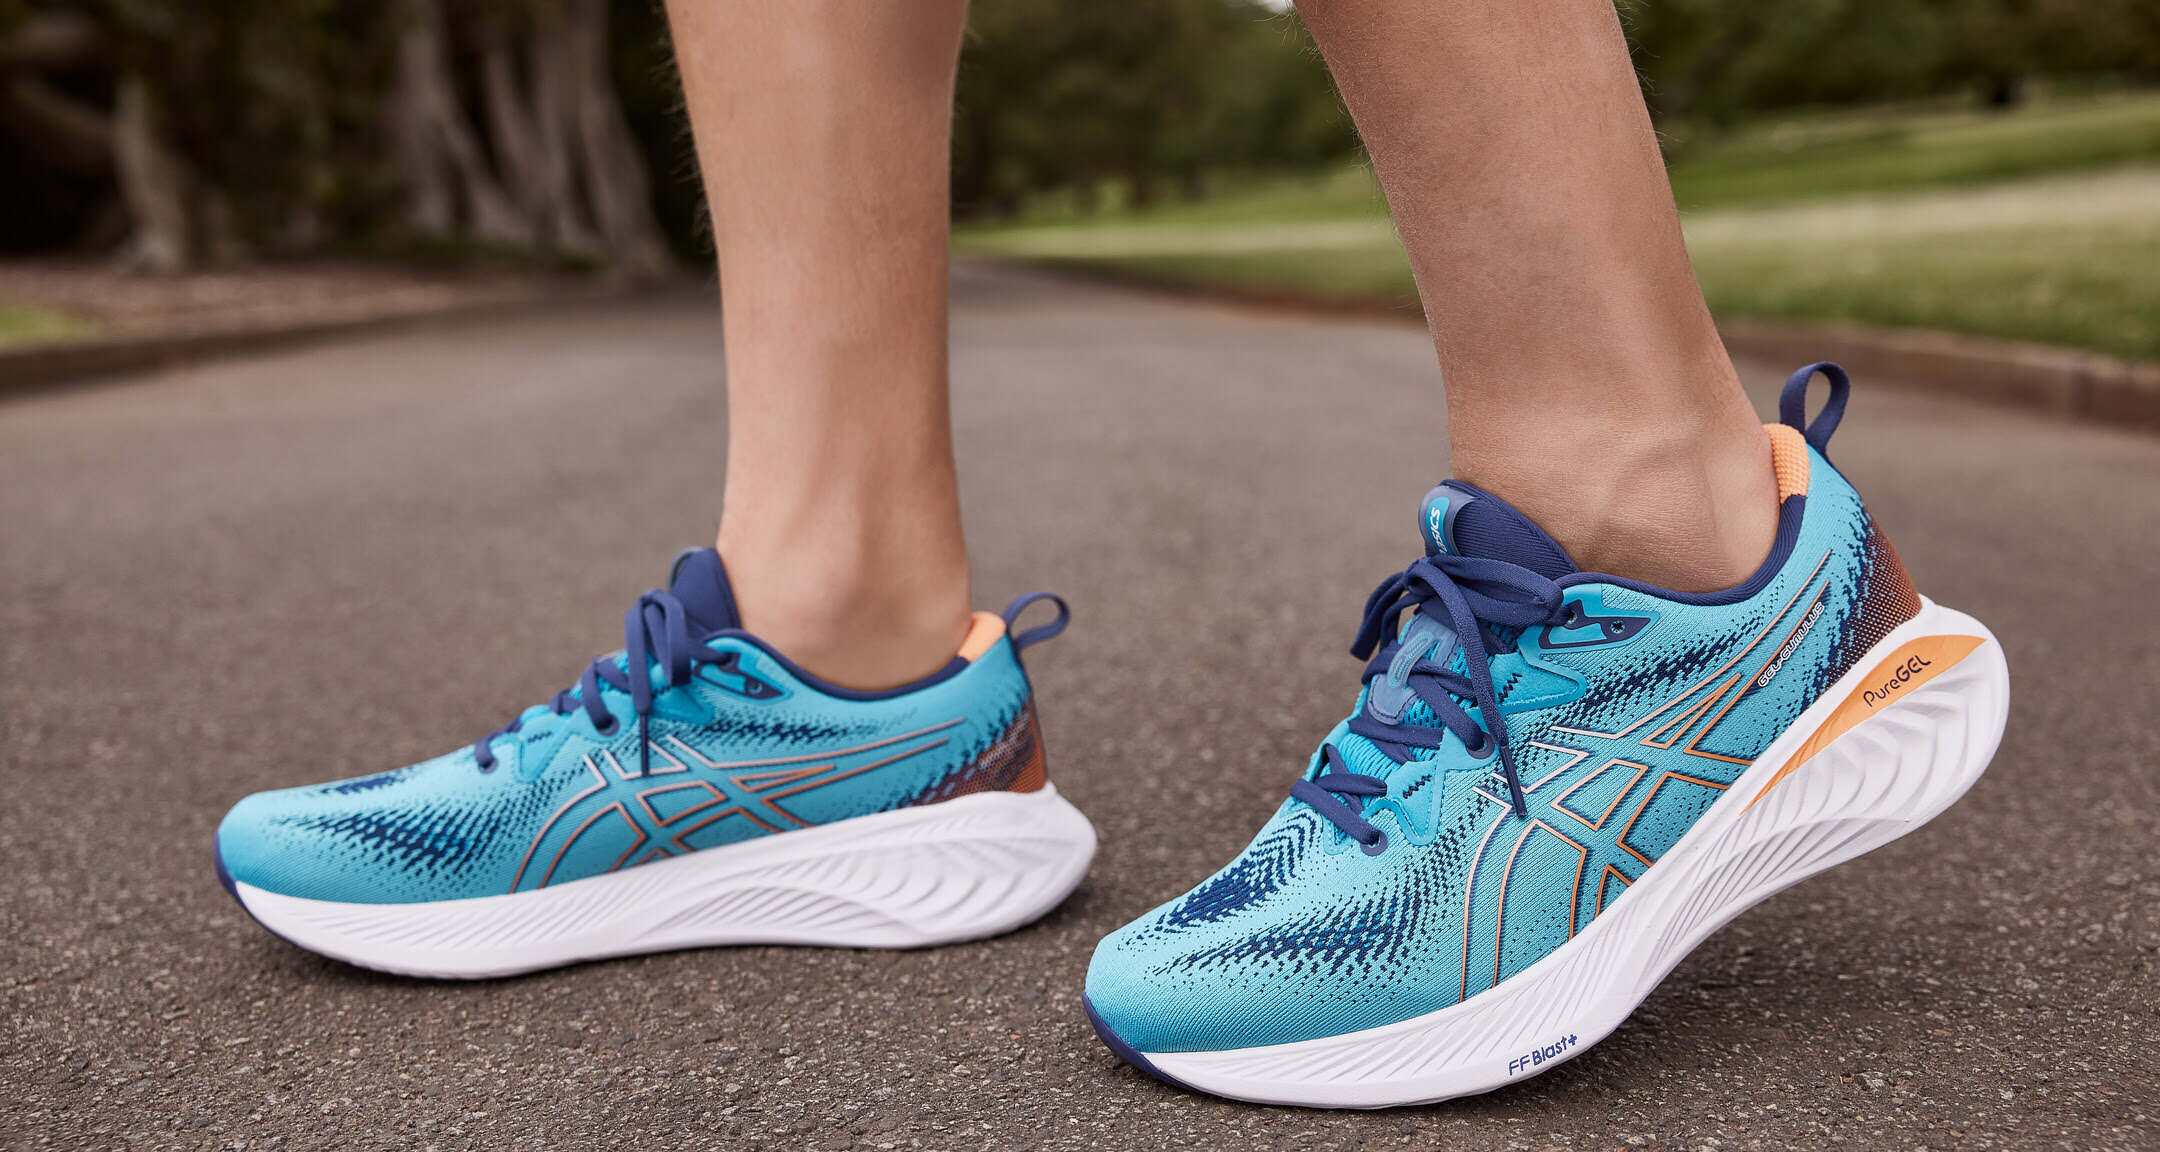 Best Running Shoes for Concrete 2021 - Top 5 for Men and Women